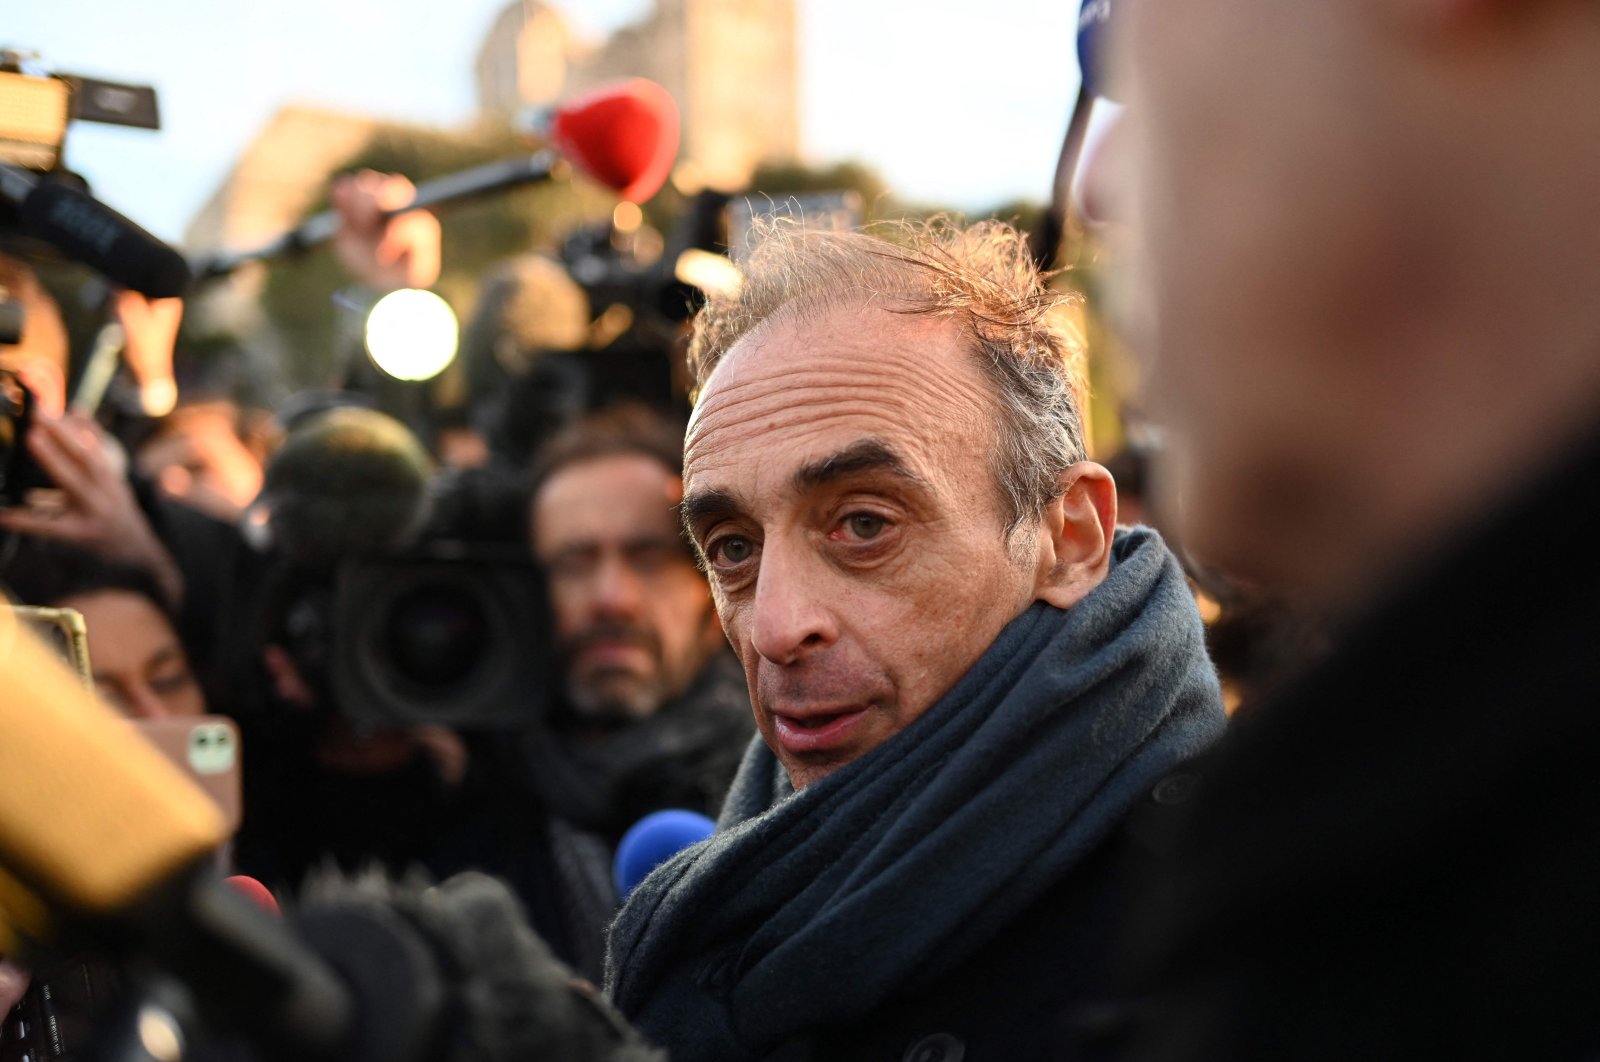 French far-right media pundit Eric Zemmour (C) gives a press conference at Notre Dame de La Garde in Marseille, southern France, Nov. 26, 2021. (AFP Photo)